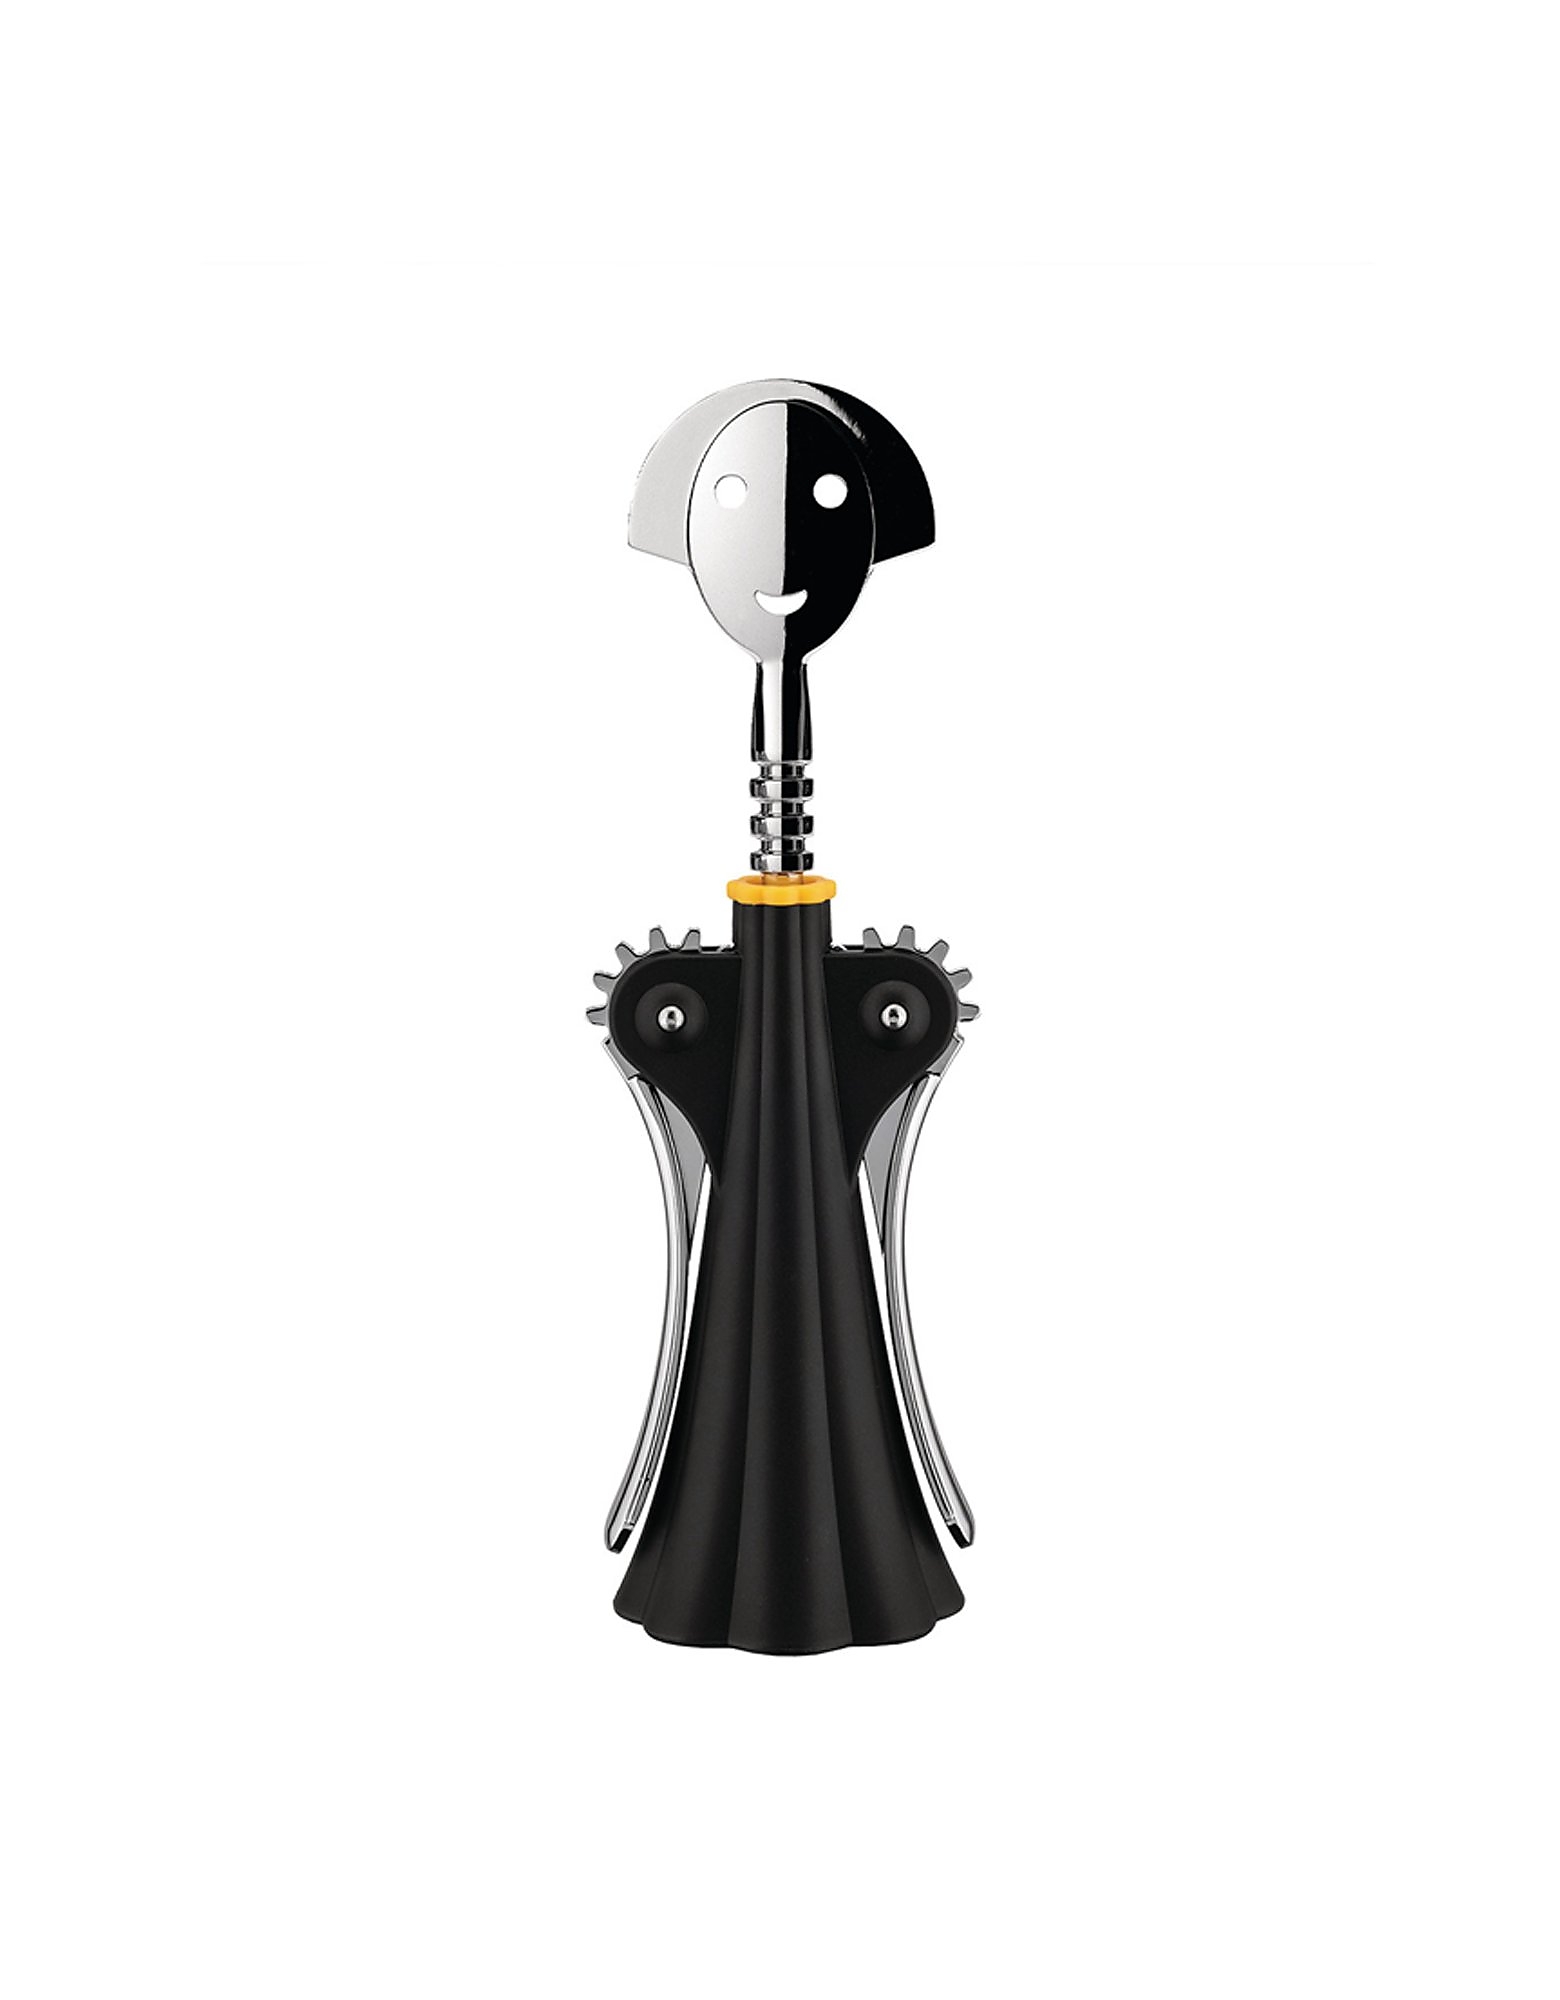 ALESSI DESIGNER KITCHEN & DINING CORKSCREW IN THERMOPLASTIC RESIN, BLACK AND CHROME-PLATED ZAMAK